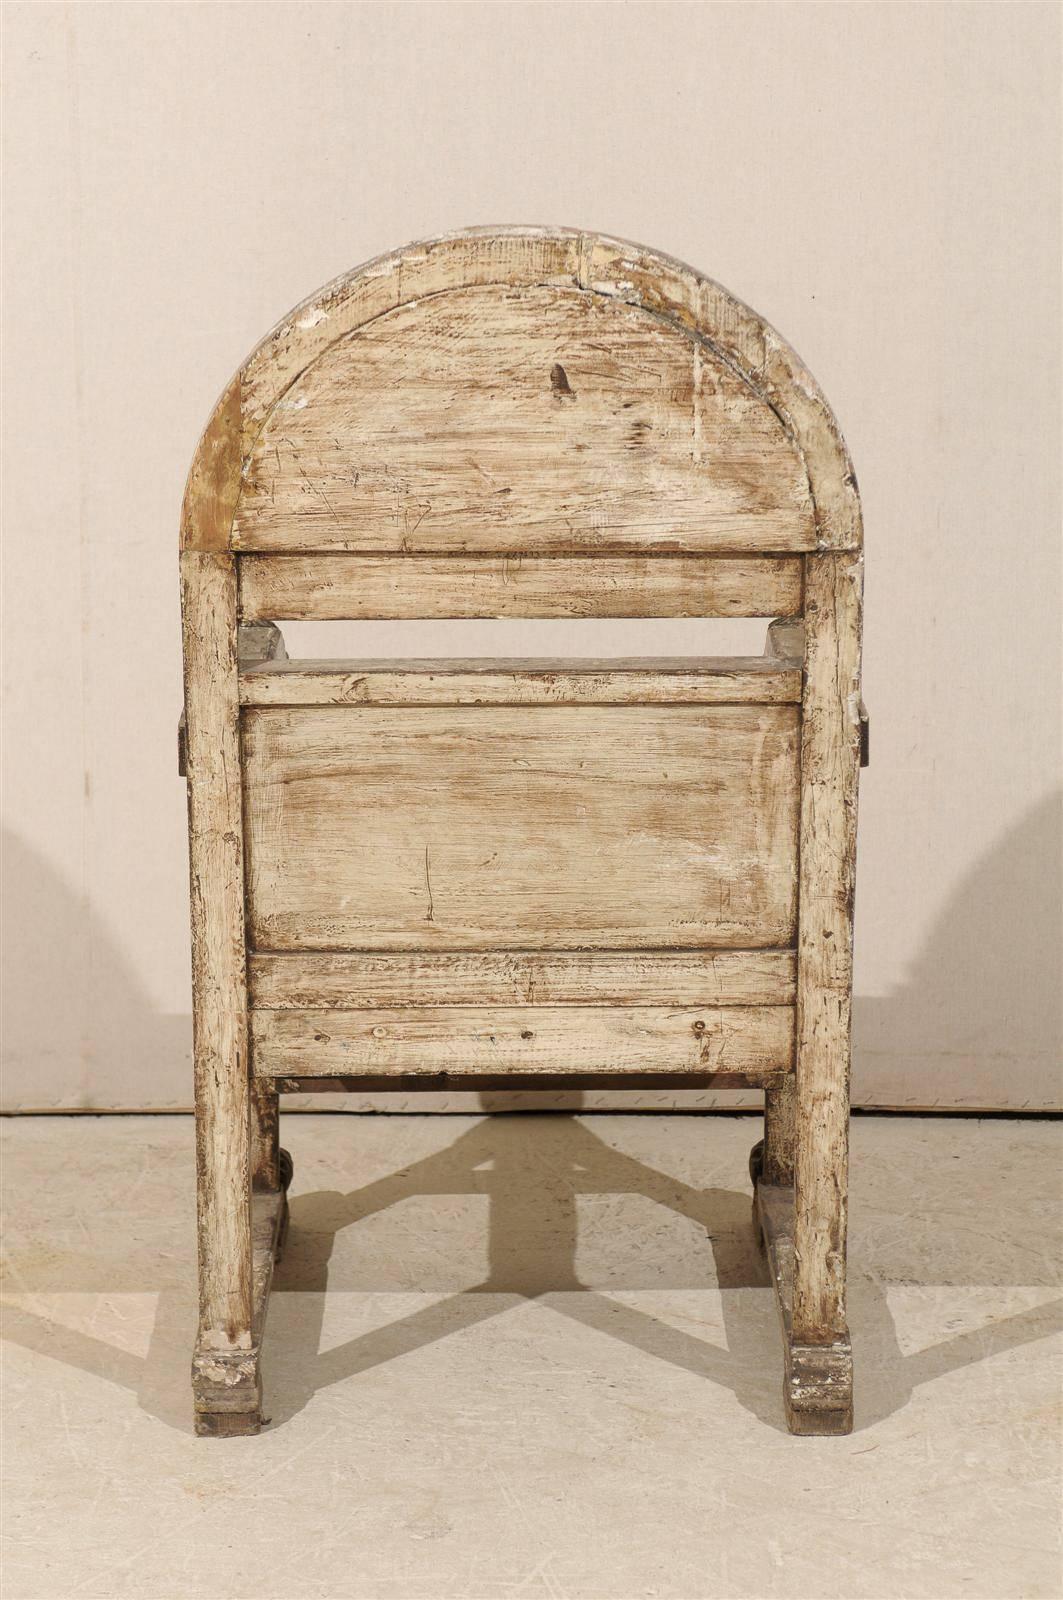 A Stately Italian Richly-Carved Wooden Chair with Elegant Aging, Early 19th C.  3